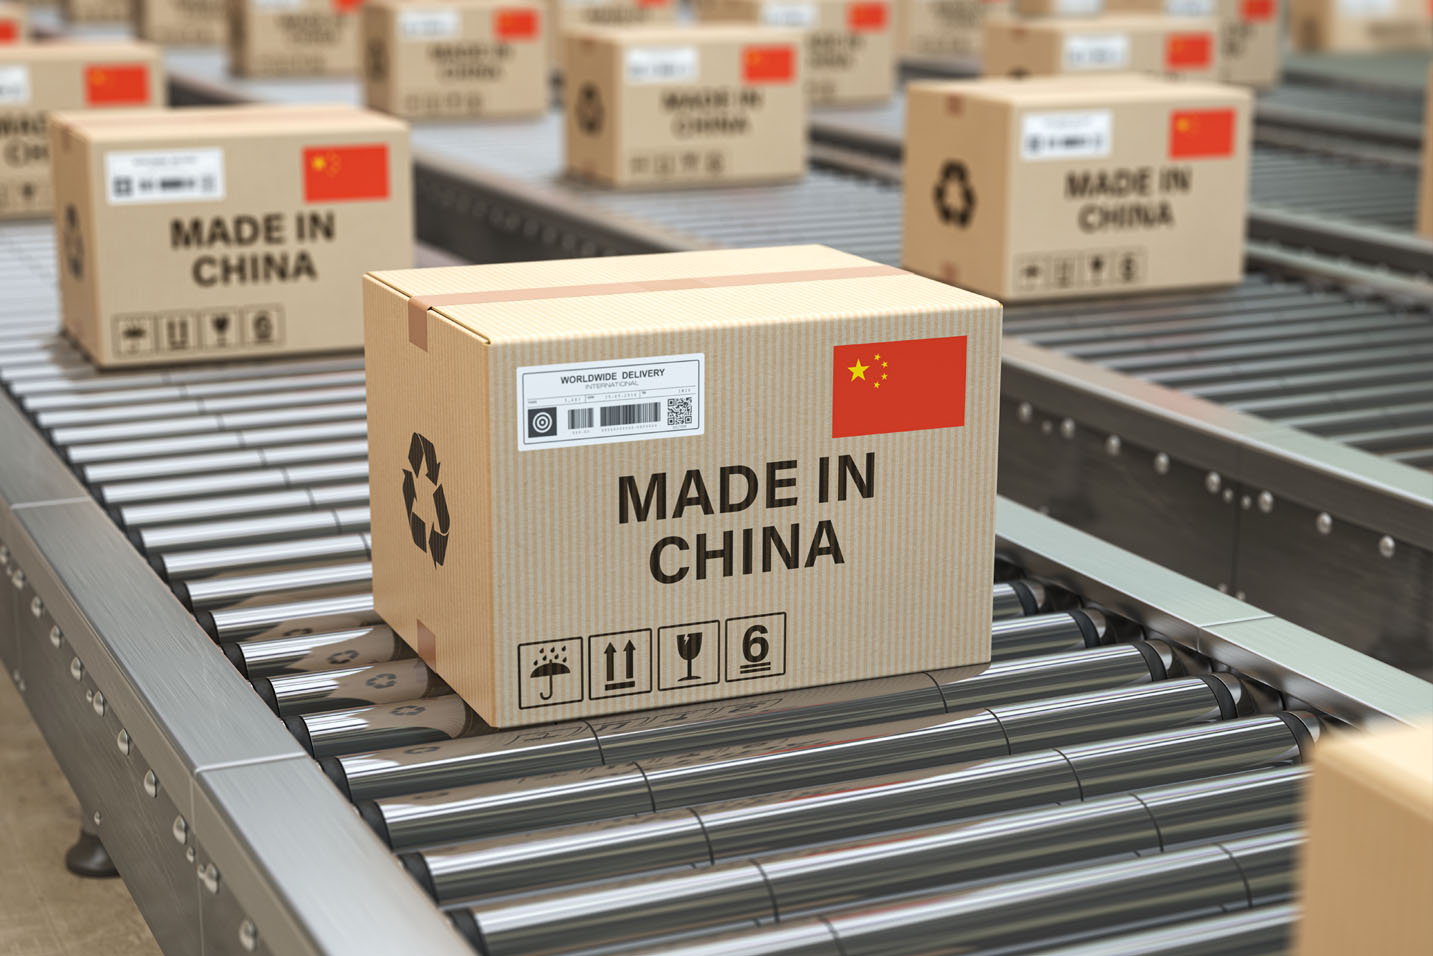 Sourcing Amazon Products Directly From China | Manufacturing Amazon Products From China